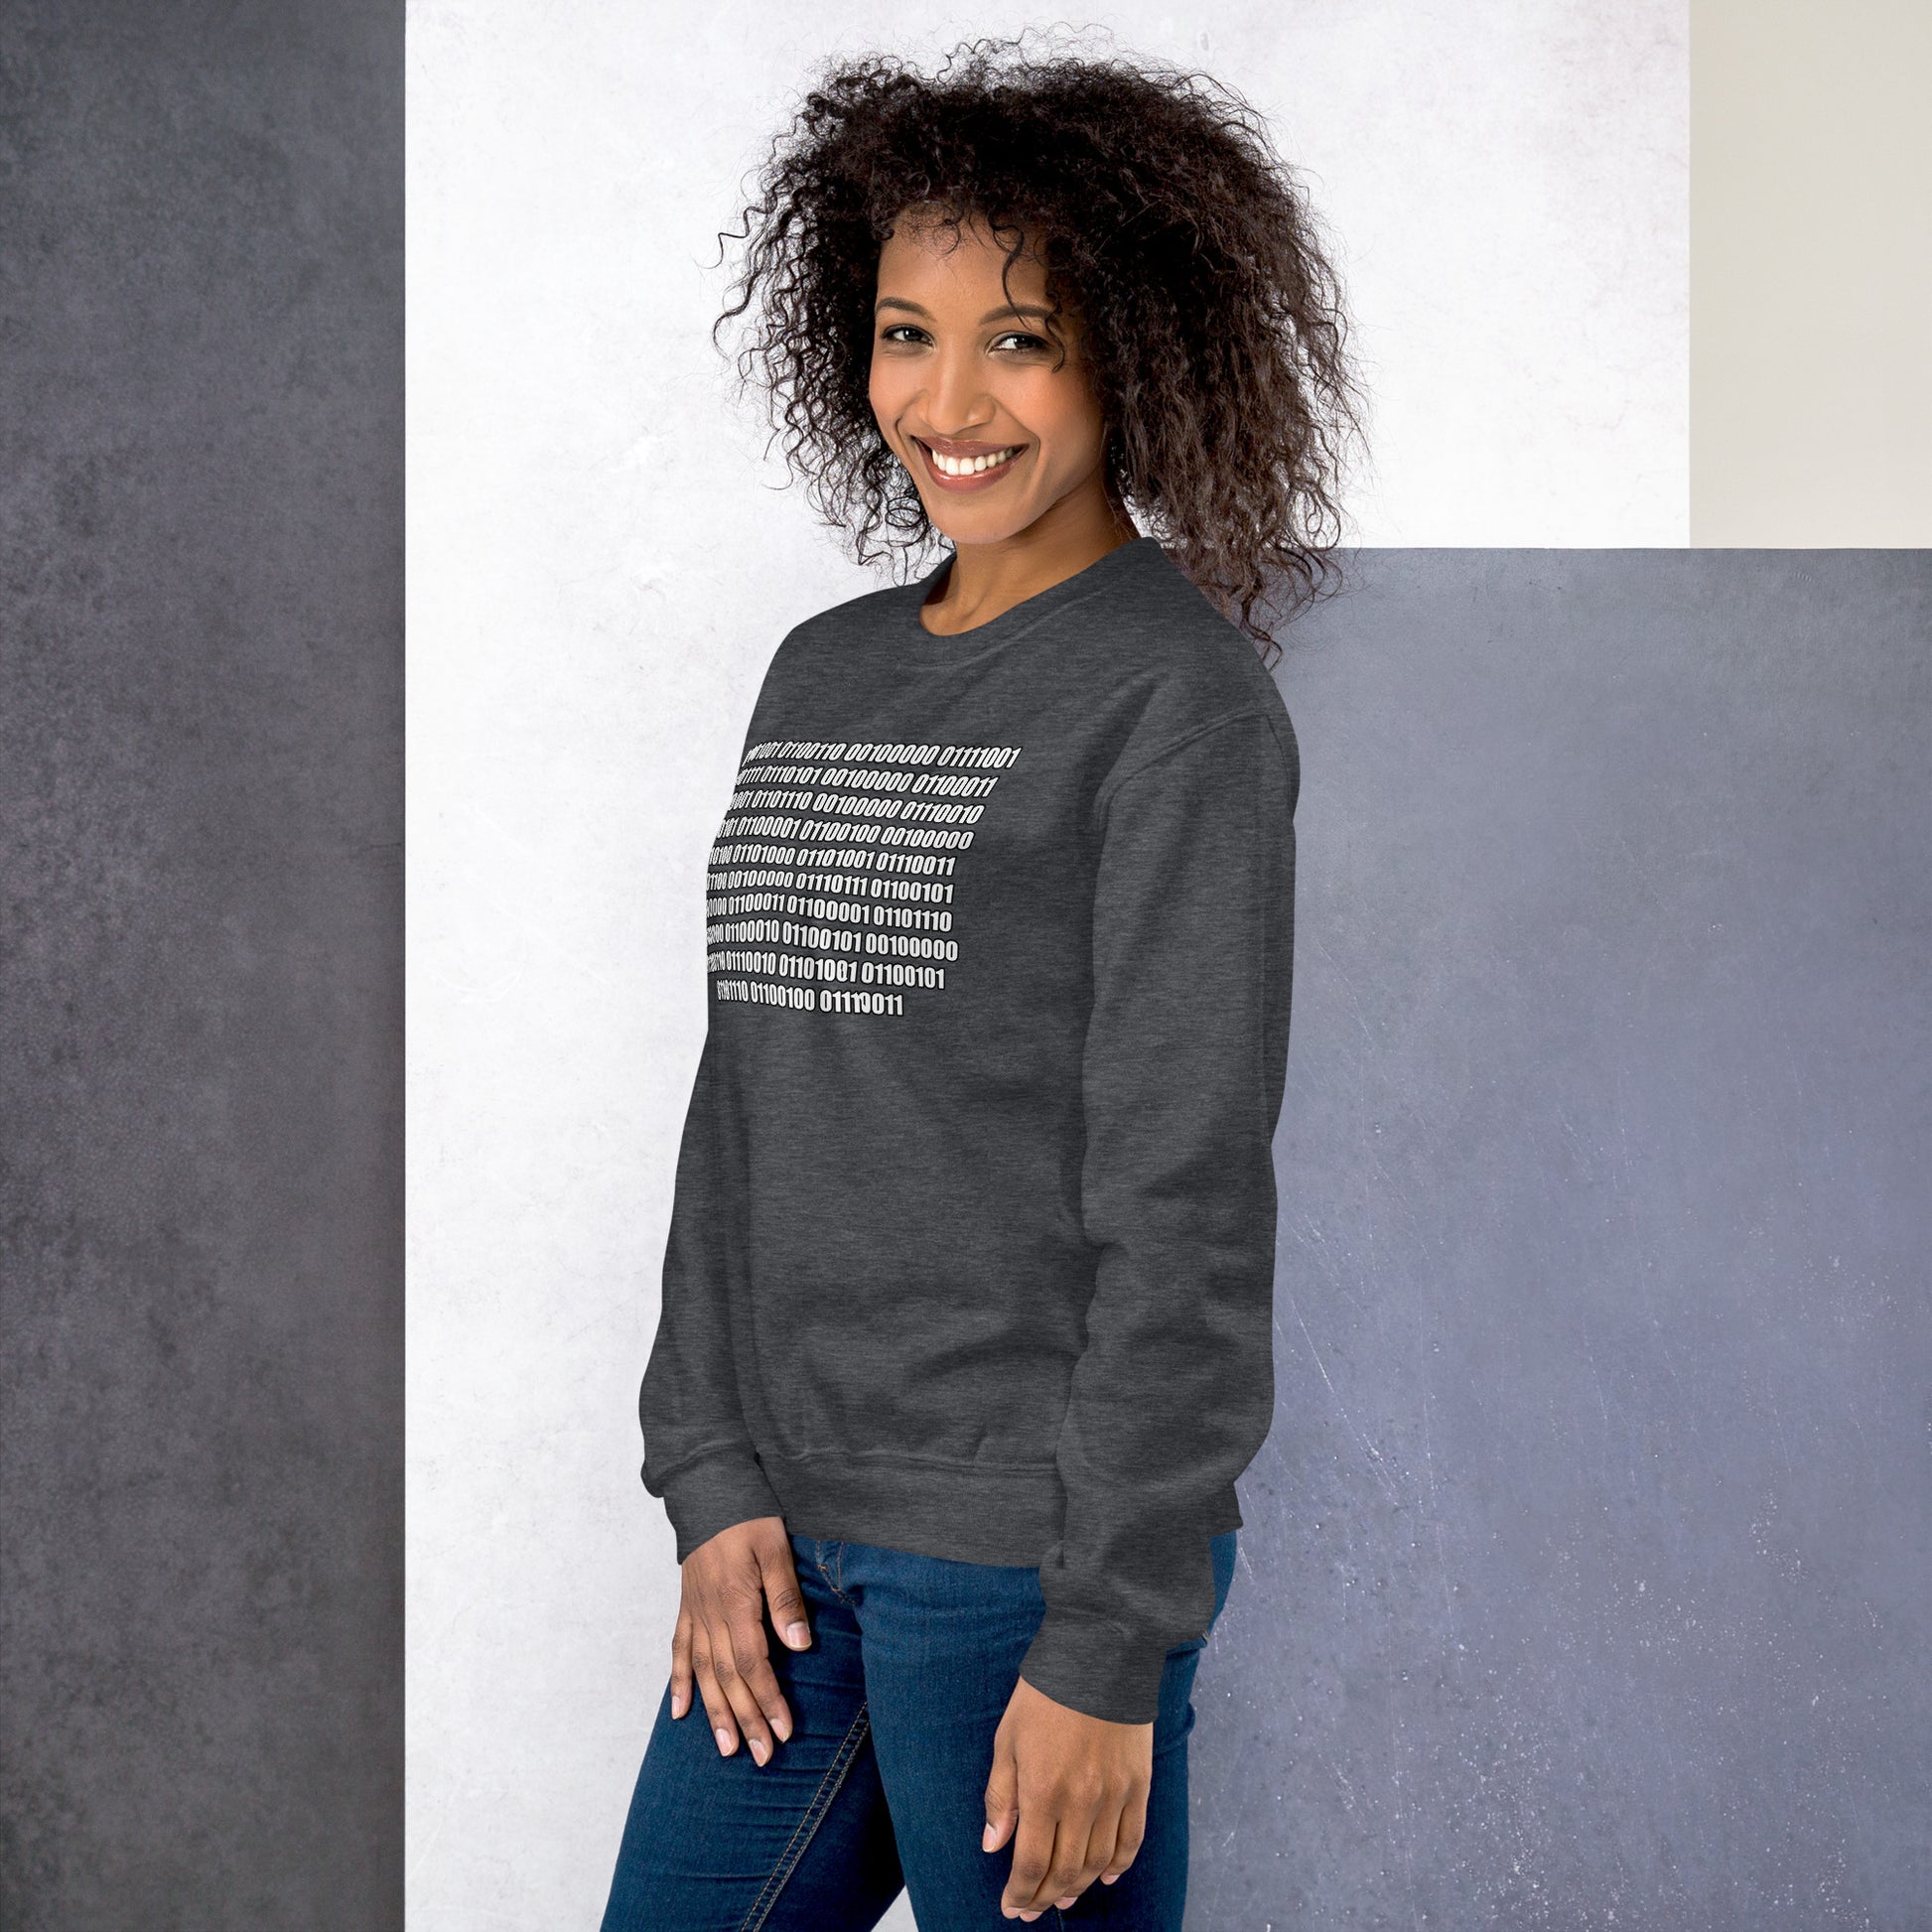 Women with dark heather sweatshirt with binaire text "If you can read this"